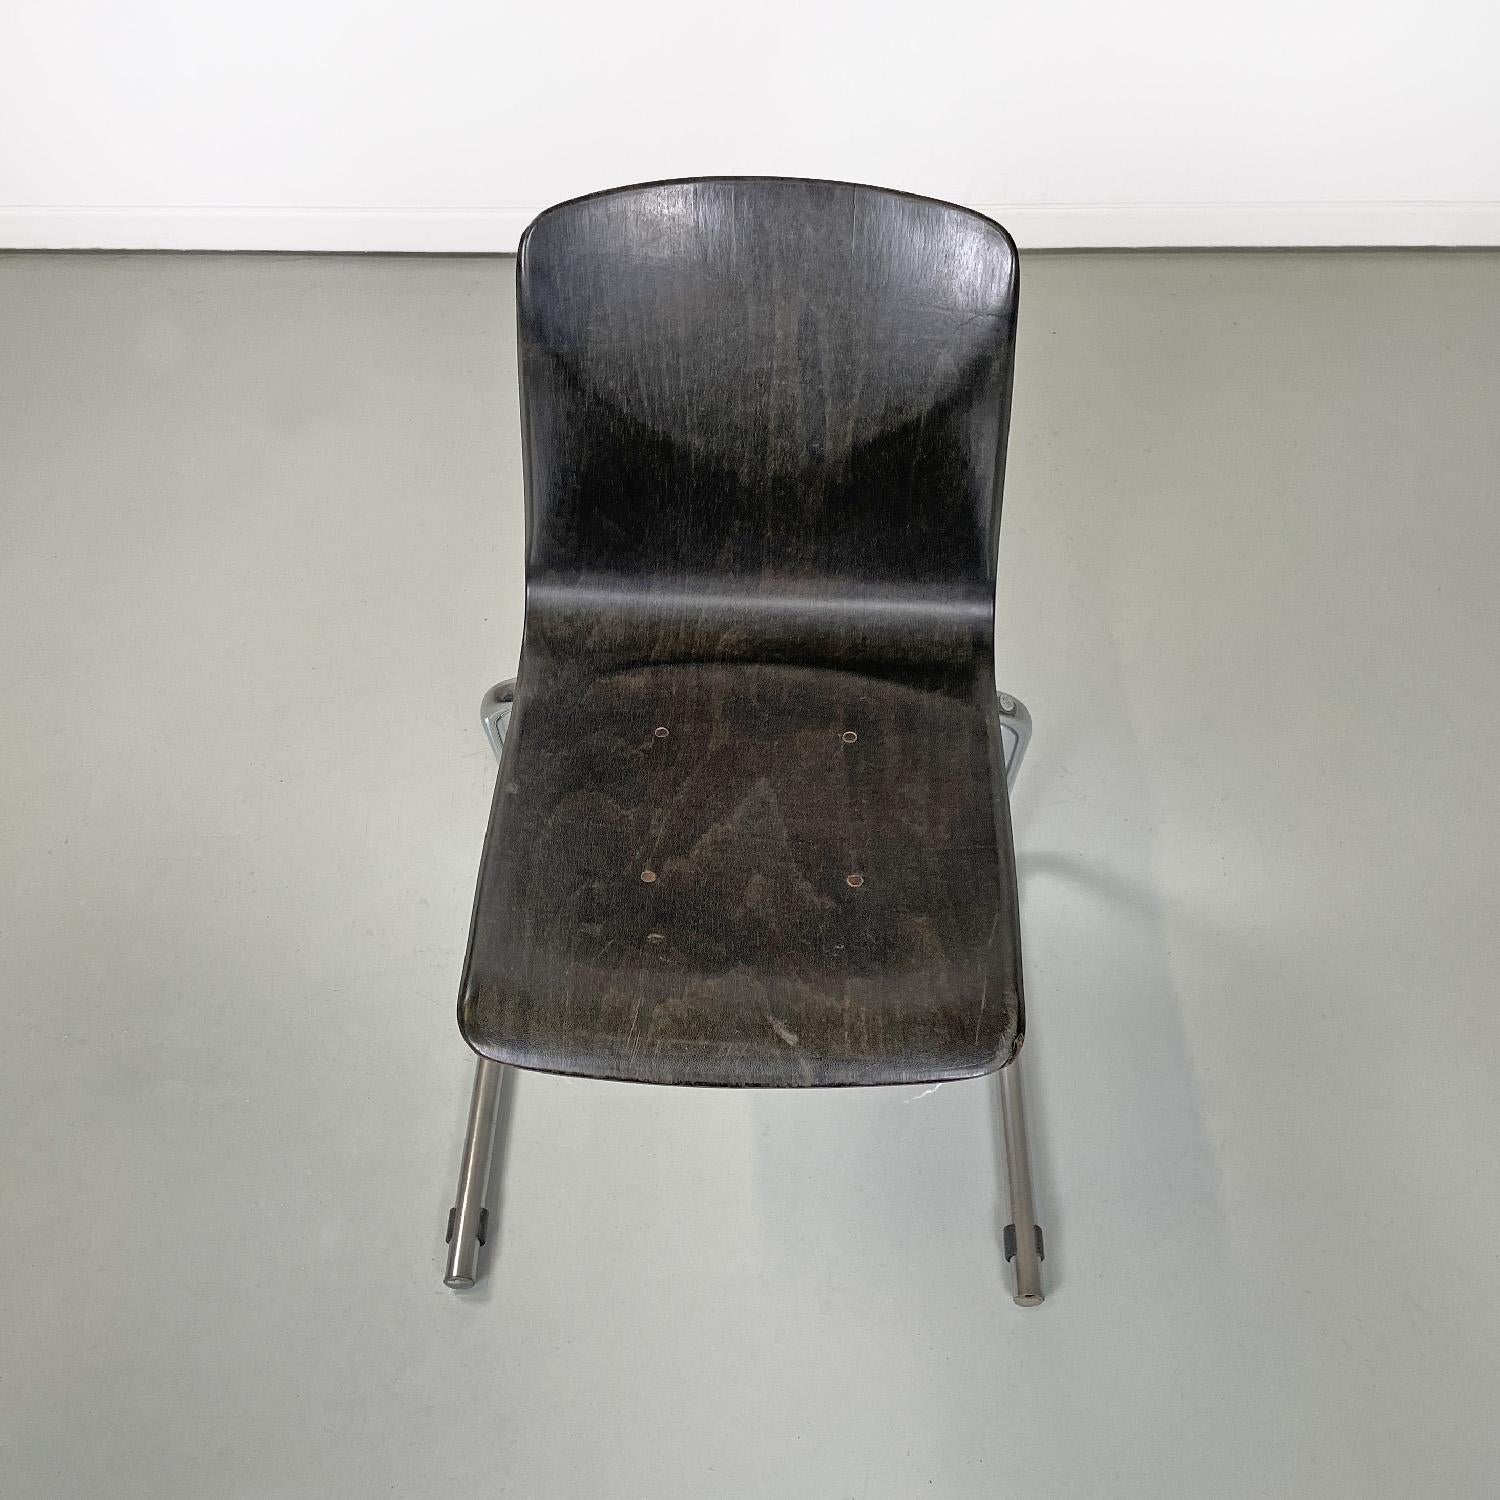 Mid-20th Century German mid-century modern black painted wood chair by Pagholz, 1960s